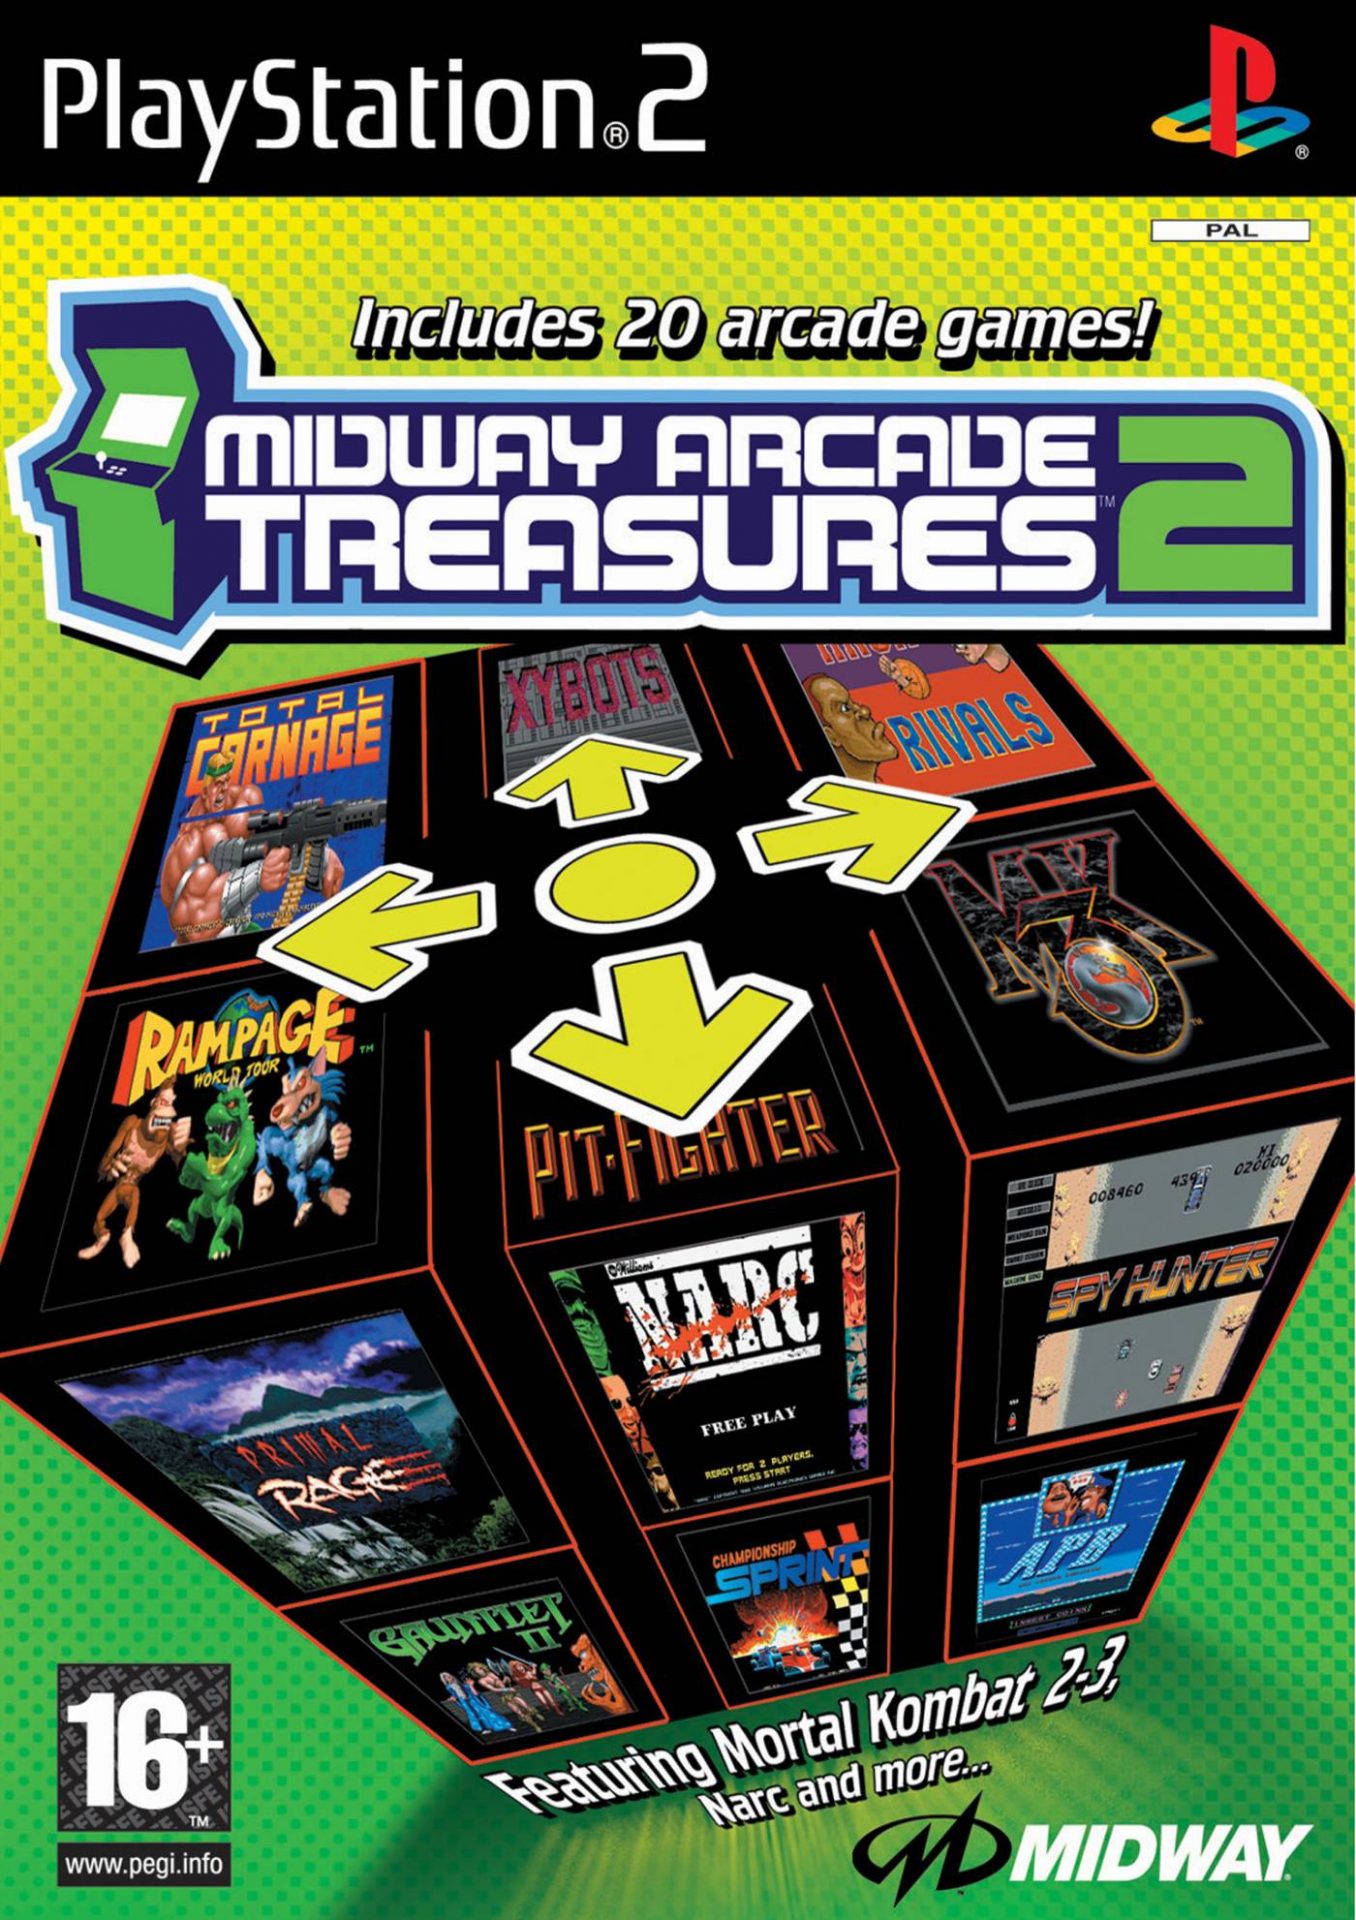 The coverart image of Midway Arcade Treasures 2